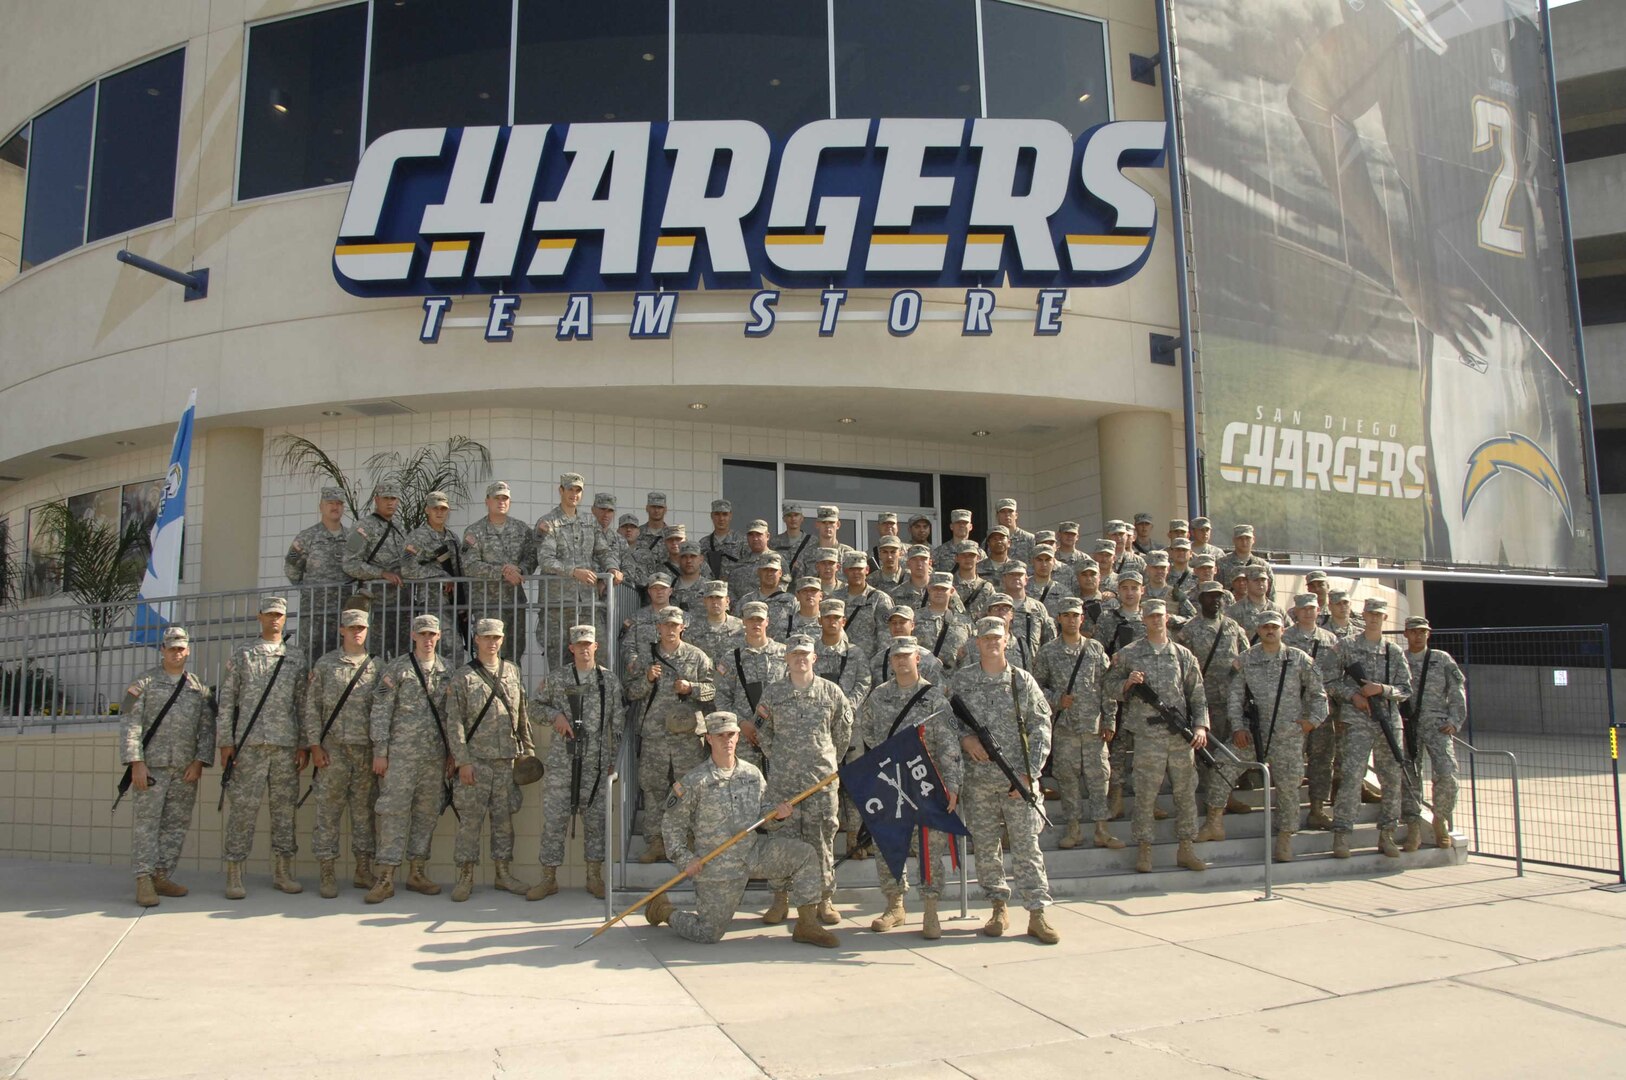 The 1-184th Infantry Battalion Charlie Company takes a well-deserved break Friday, October 26, 2007 after providing perimeter security and assisting volunteers and evacuees at the San Diego Chargers' Qualcom Stadium in California in support of Operation Fall Blaze.